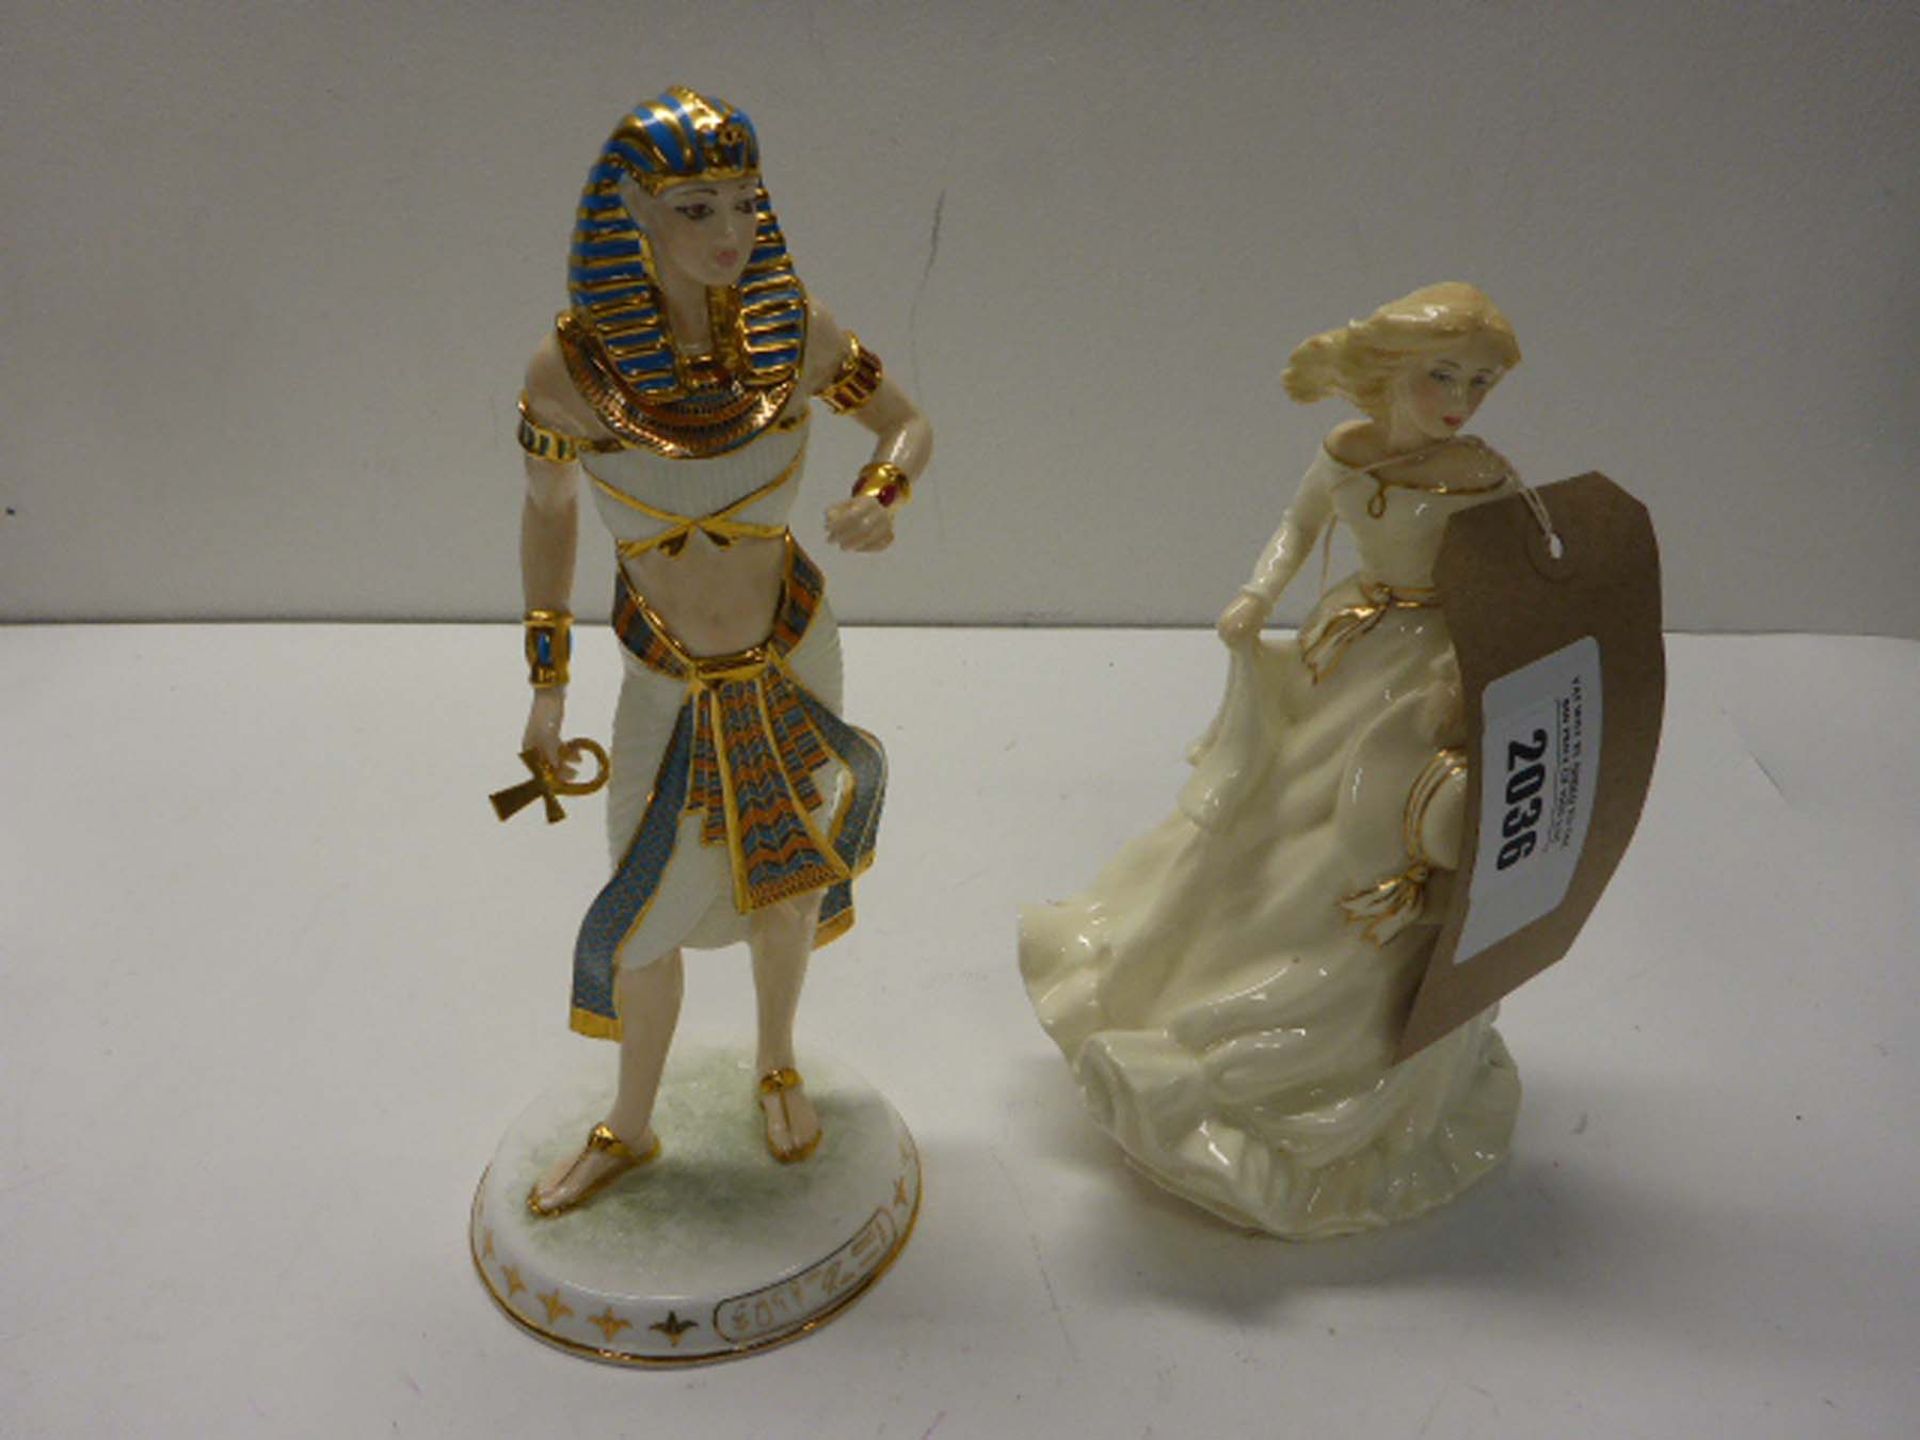 Wedgewood Tutnkhamun '' The Boy King '' figure, together with Royal Doulton Summer breeze 1995